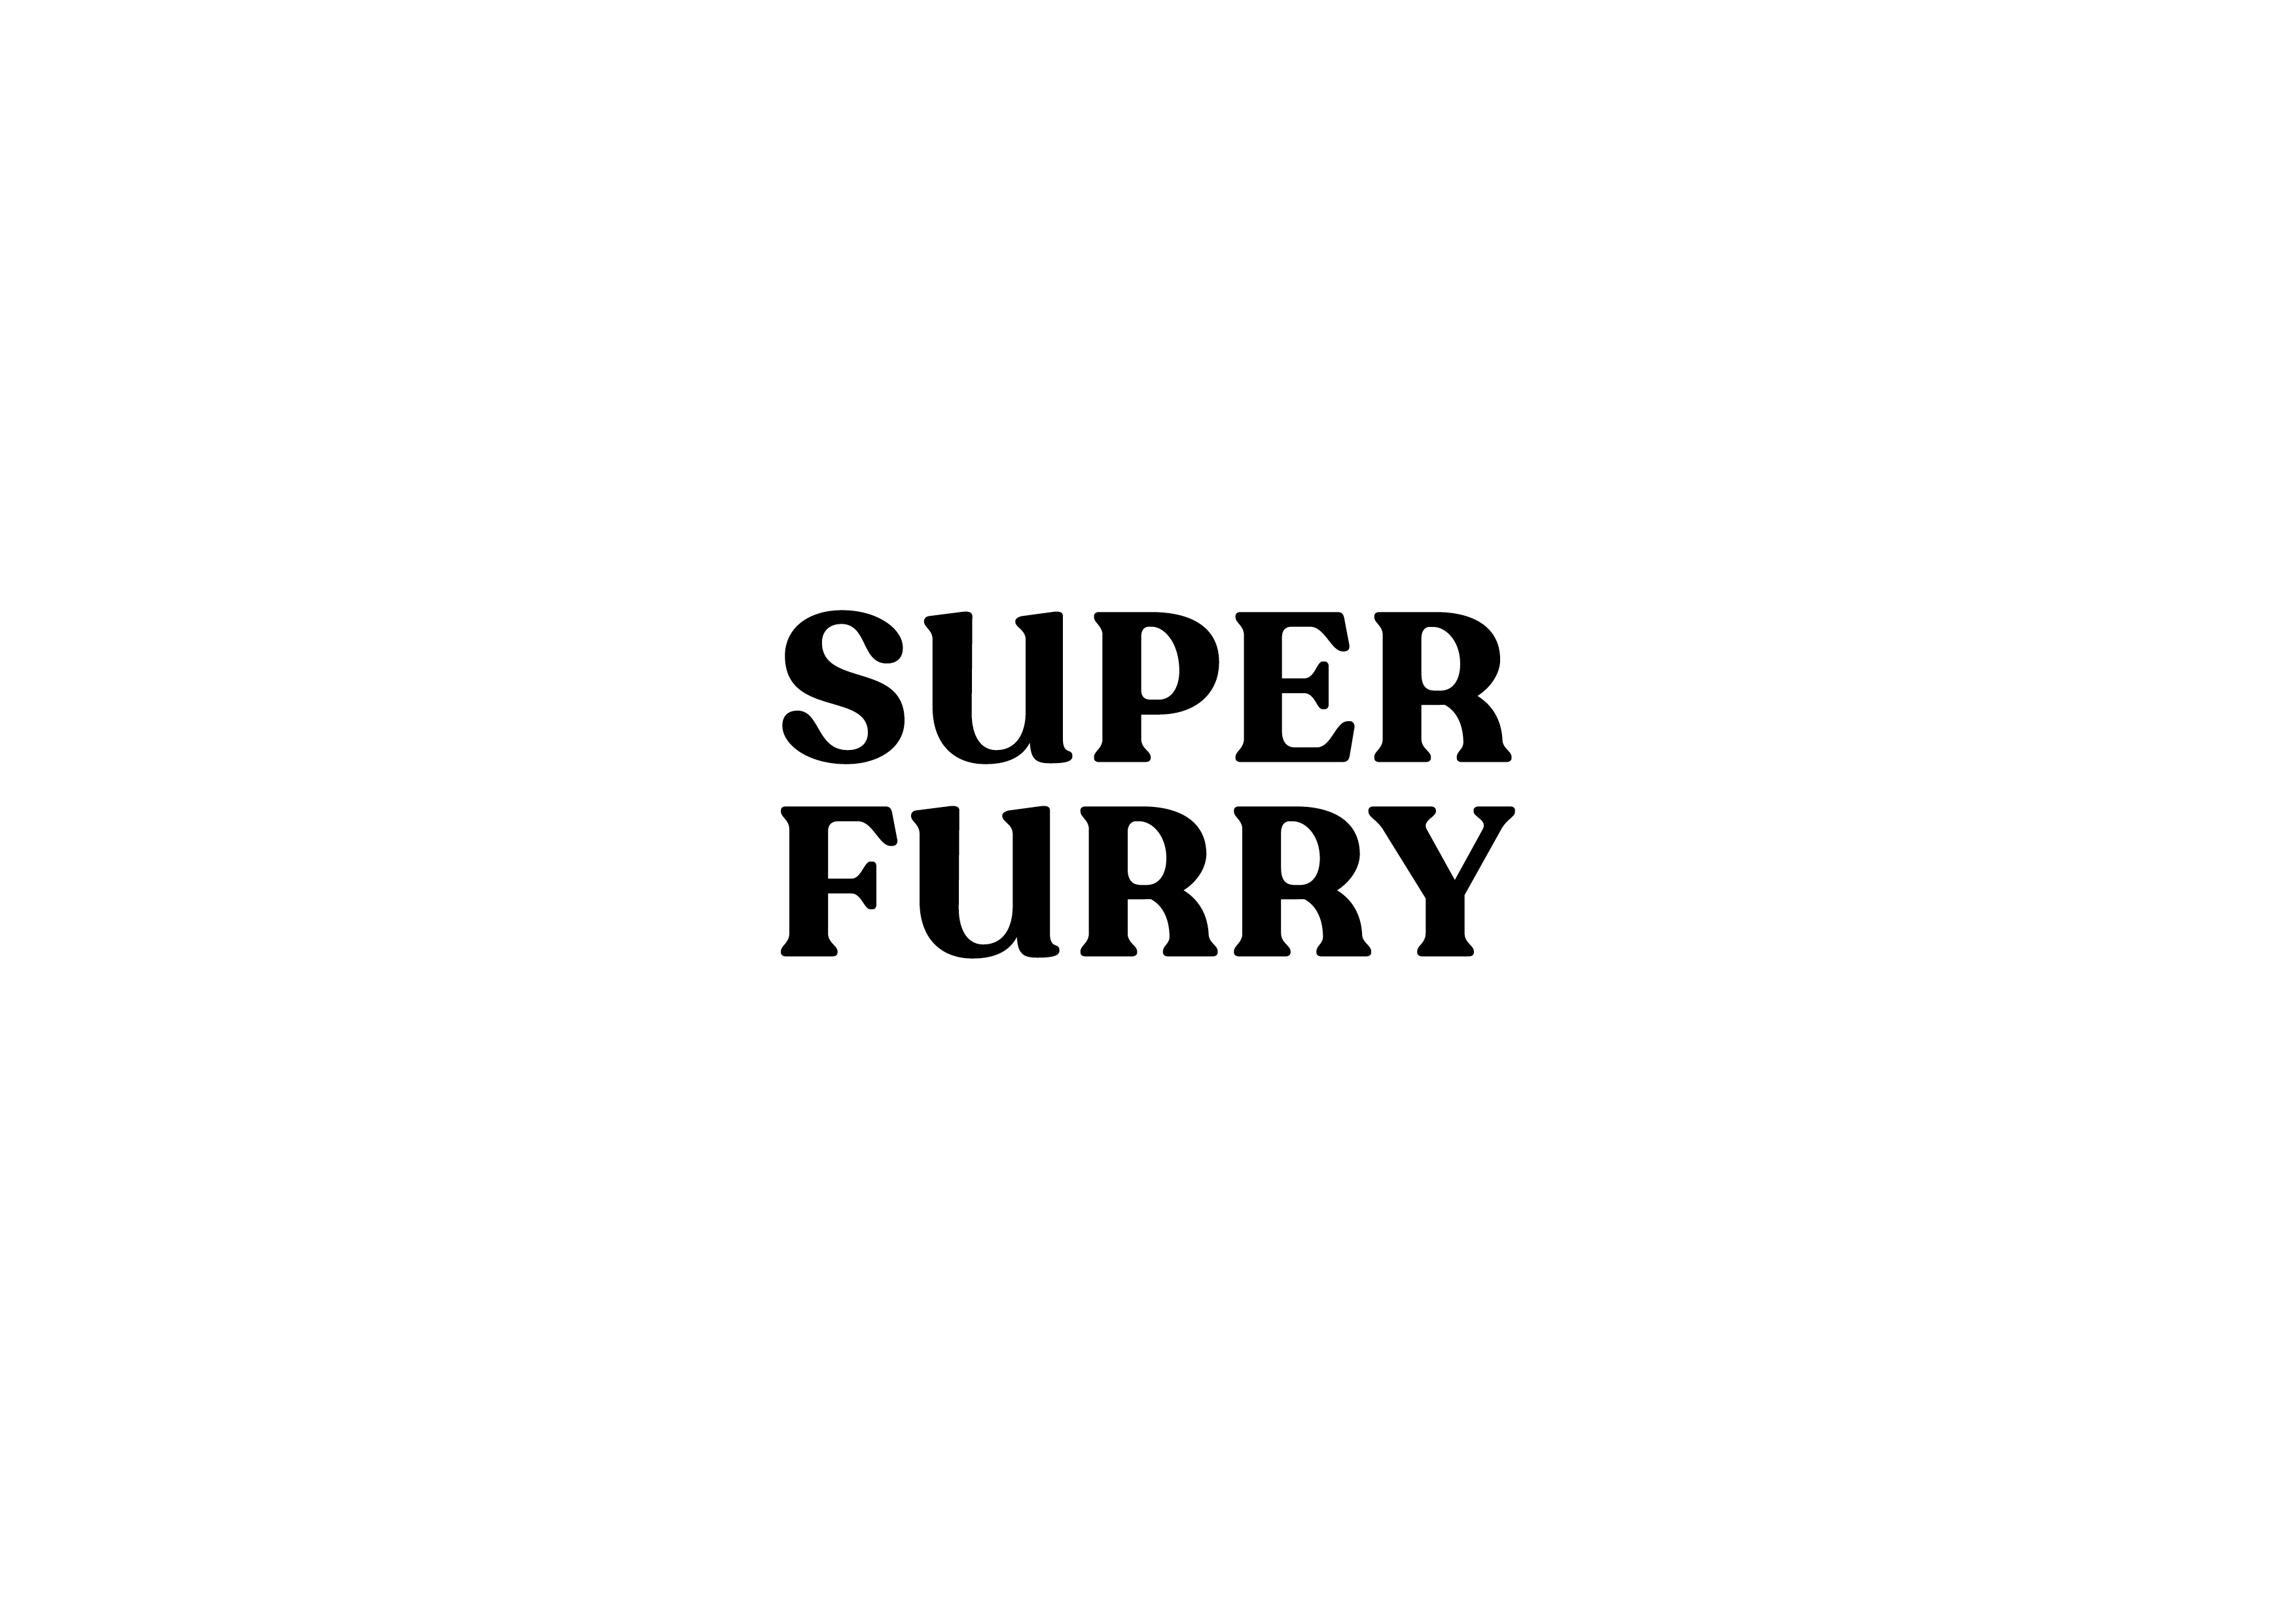 Super Furry Teas and Toasts Official Store